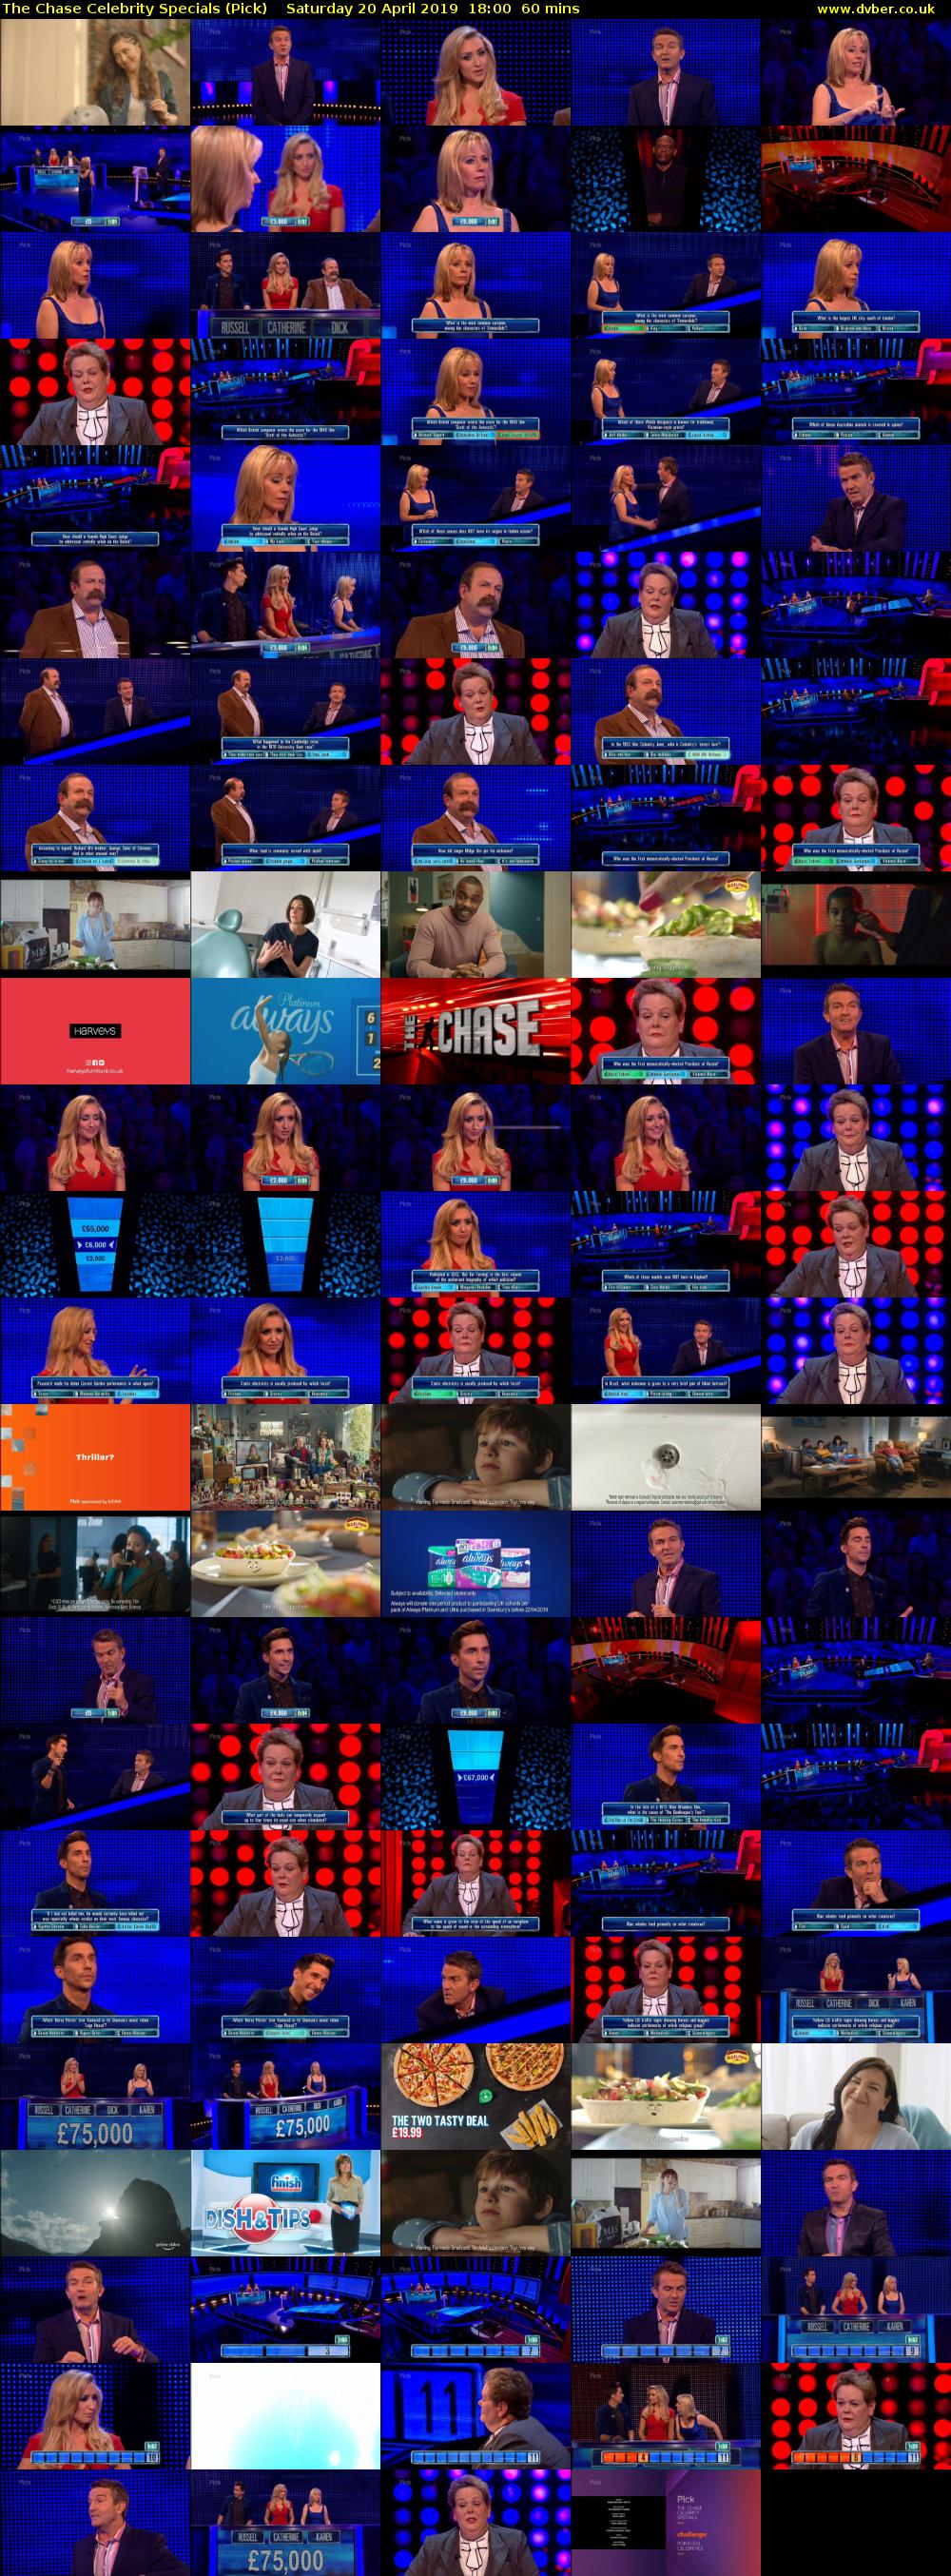 The Chase Celebrity Specials (Pick) Saturday 20 April 2019 18:00 - 19:00